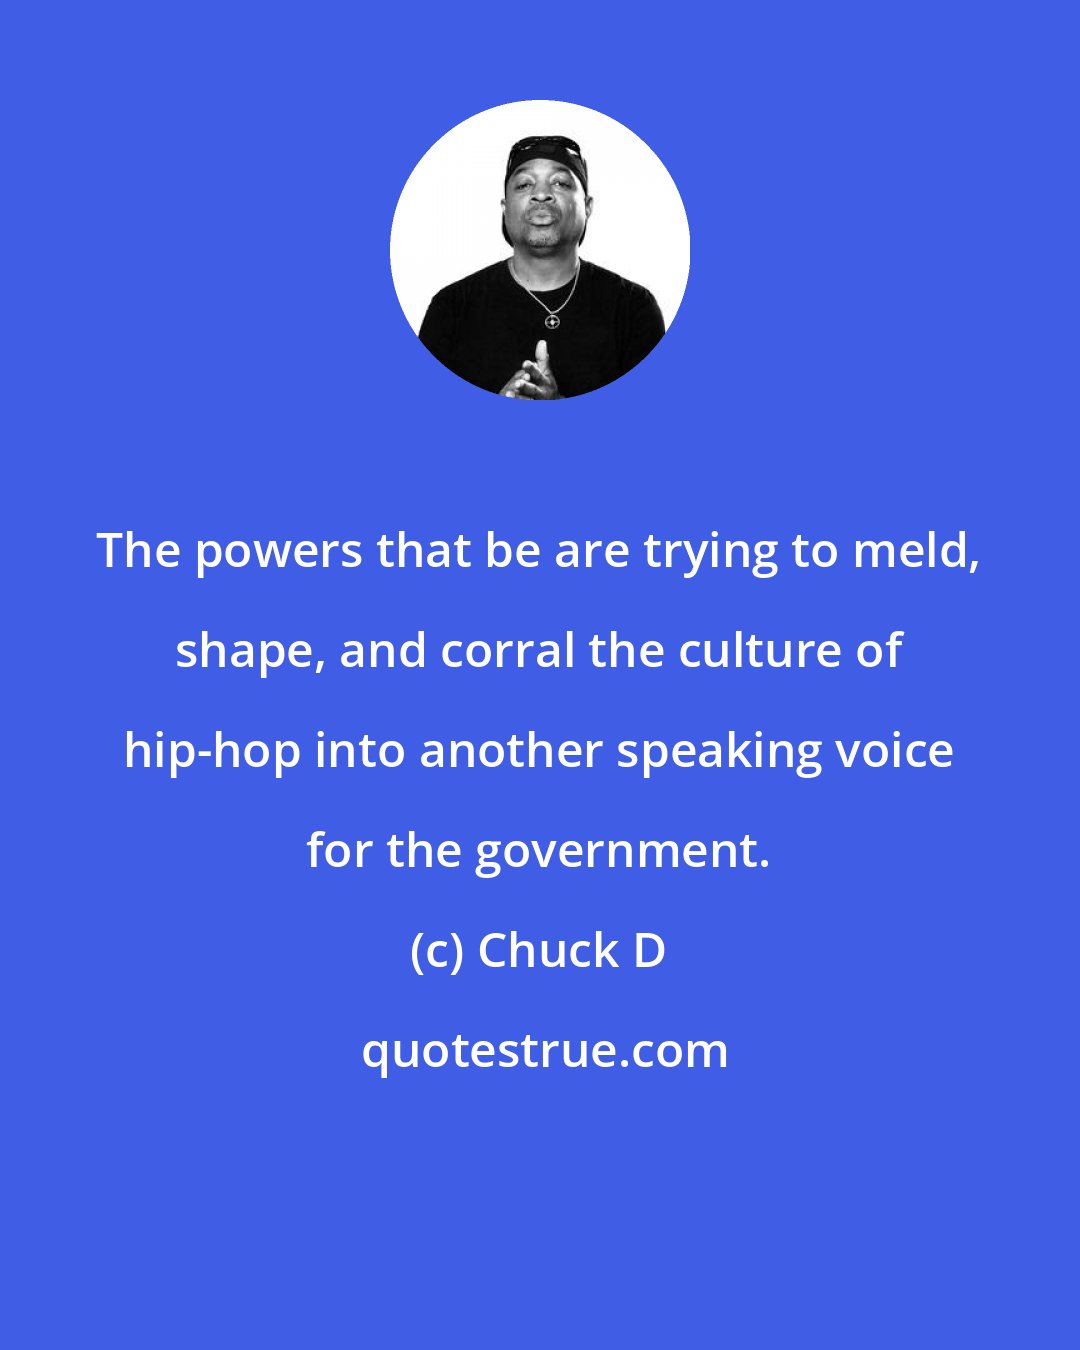 Chuck D: The powers that be are trying to meld, shape, and corral the culture of hip-hop into another speaking voice for the government.